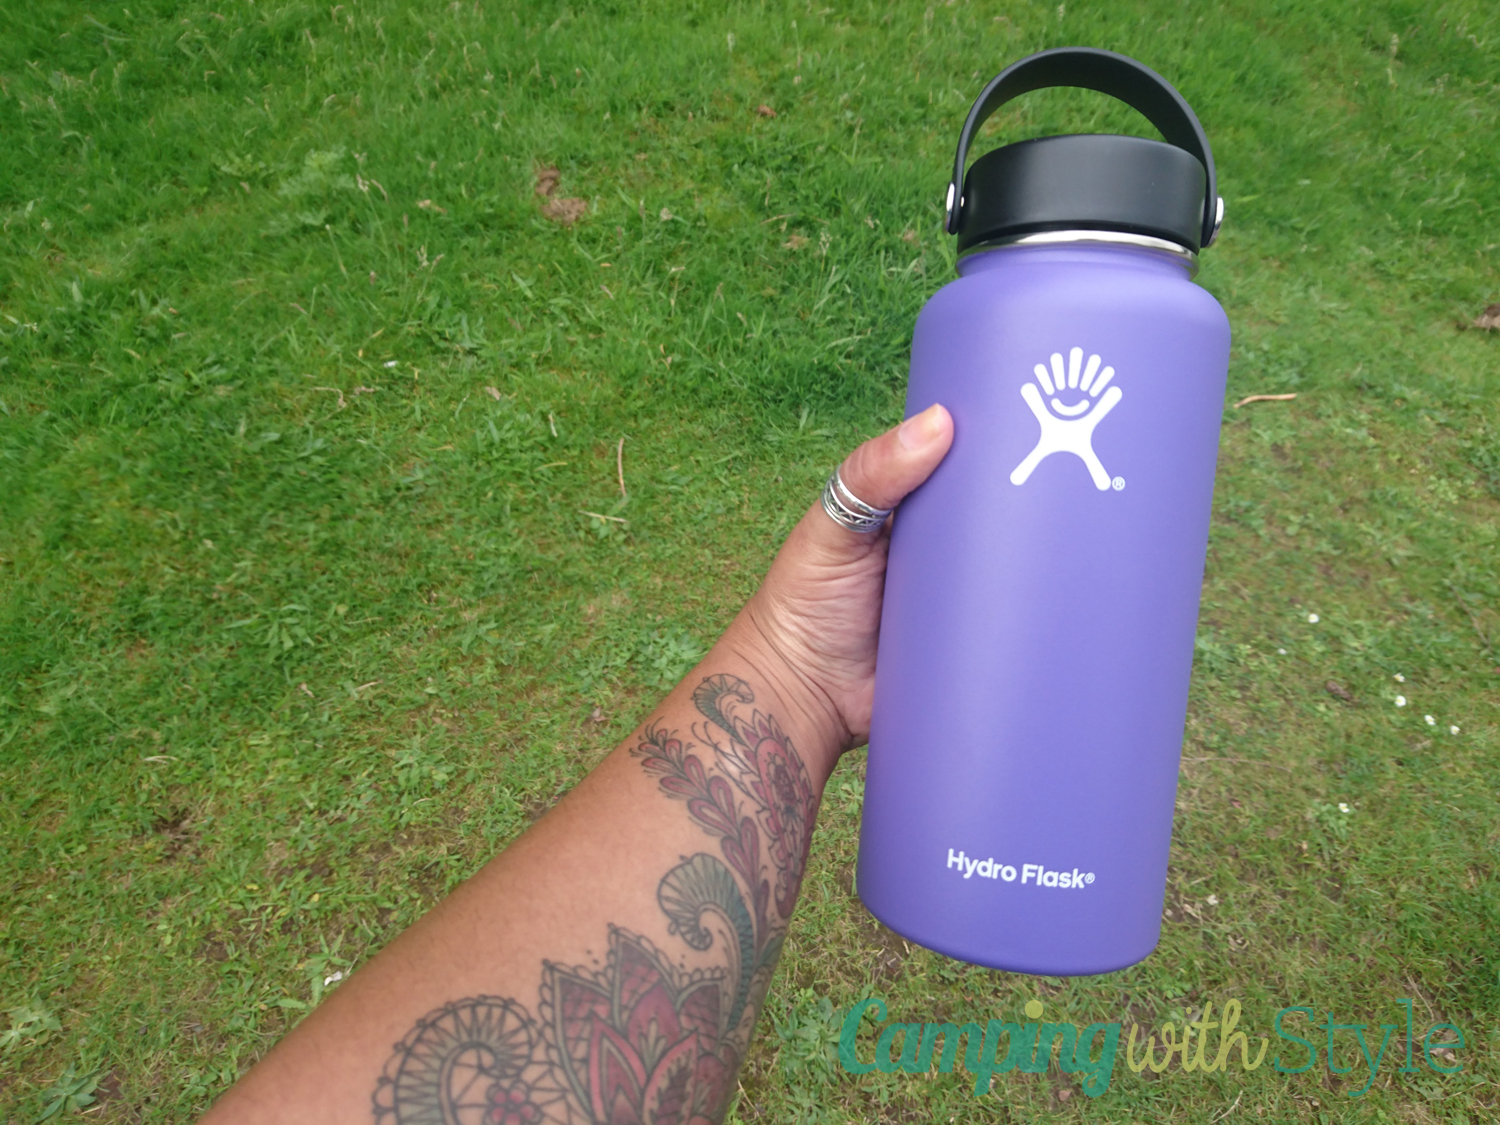 https://www.campingwithstyle.co.uk/wp-content/uploads/2016/06/hydro-flask-review-00.jpg